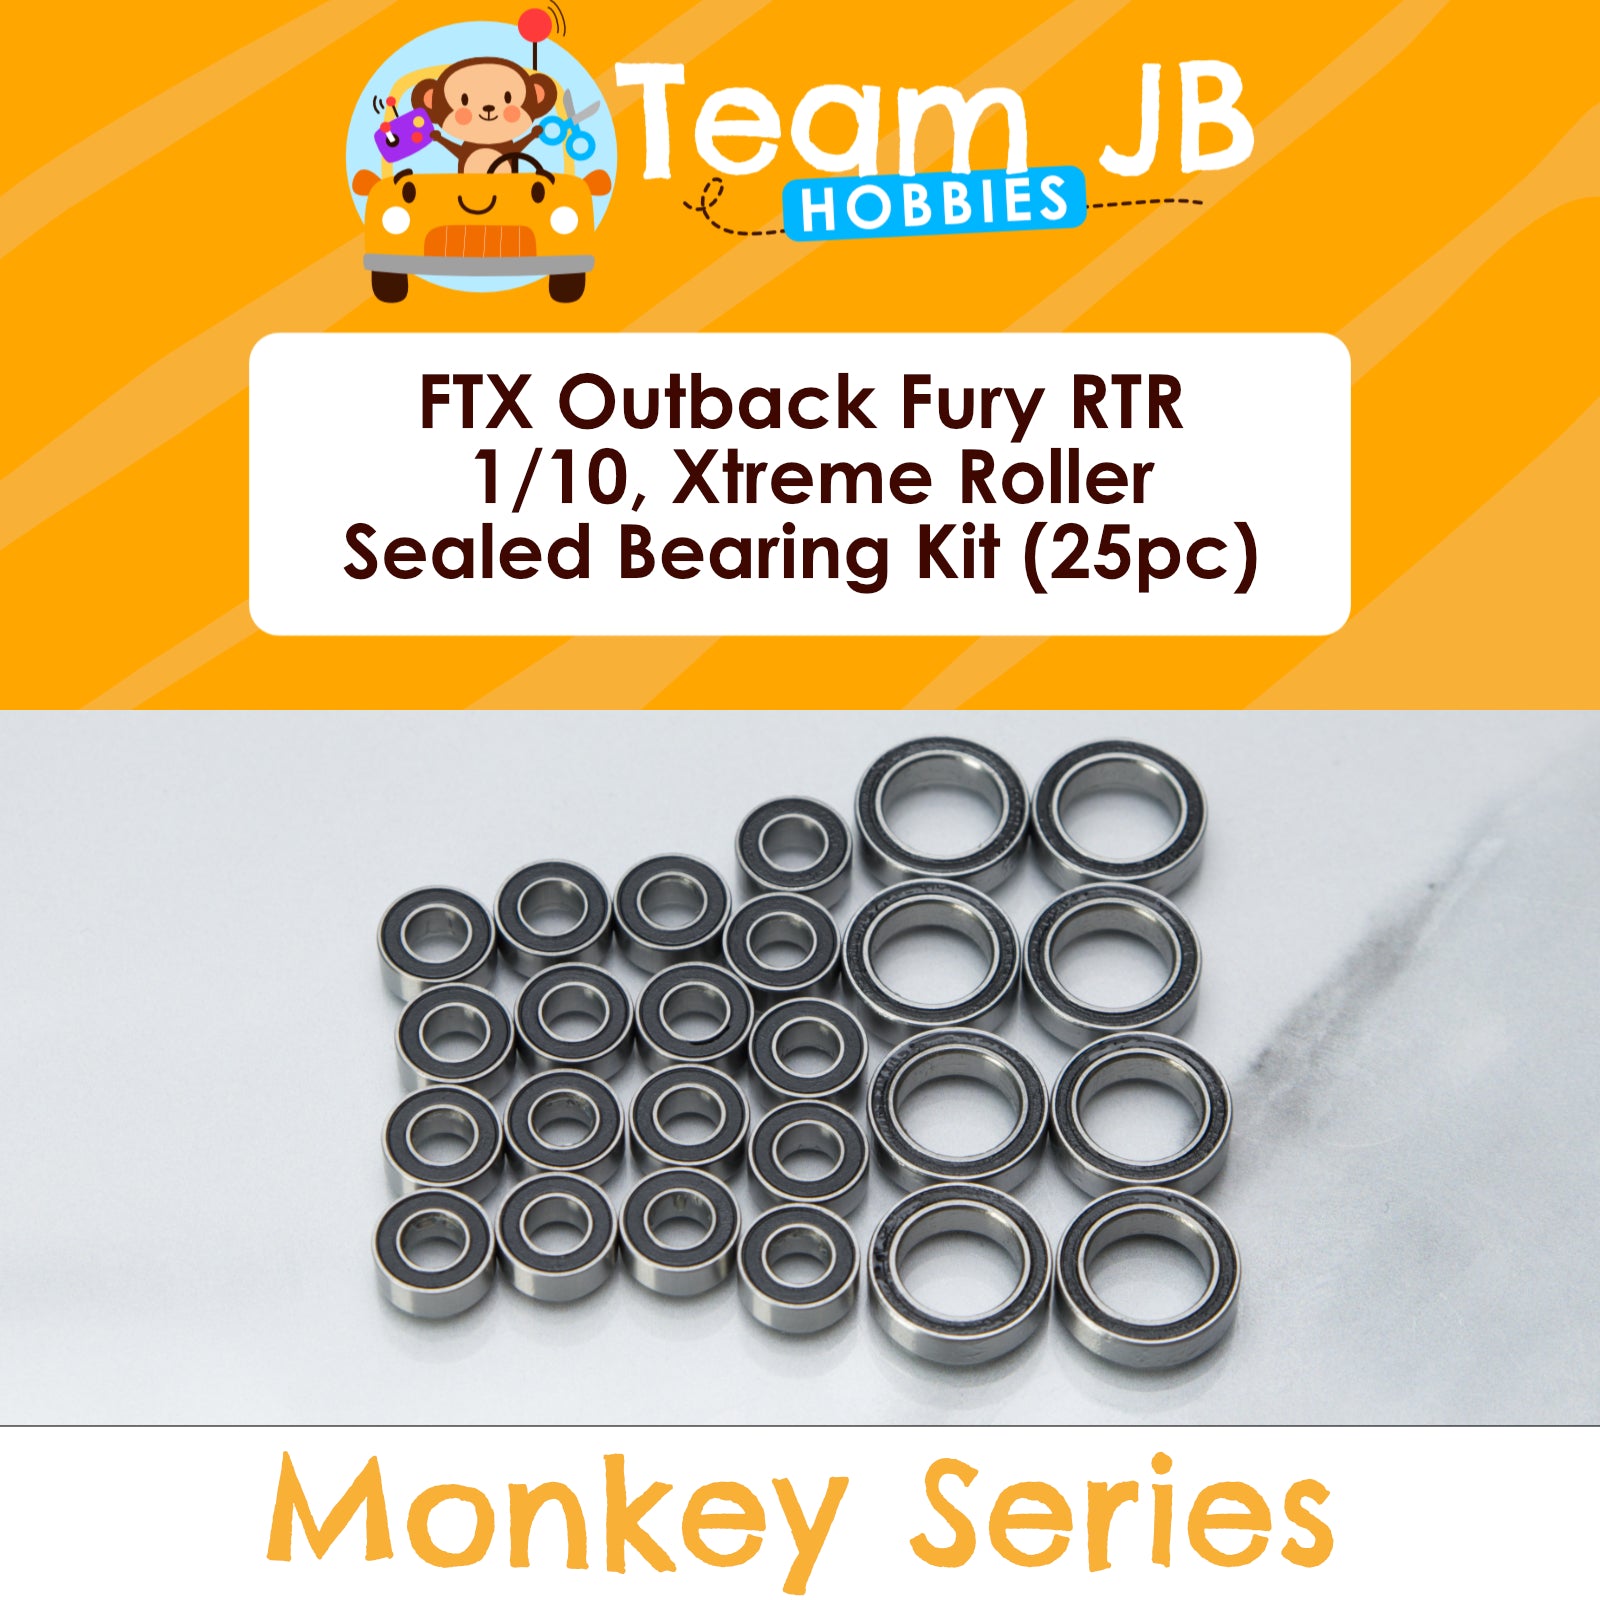 FTX Outback Fury RTR 1/10, Outback Fury Xtreme Roller - Sealed Bearing Kit